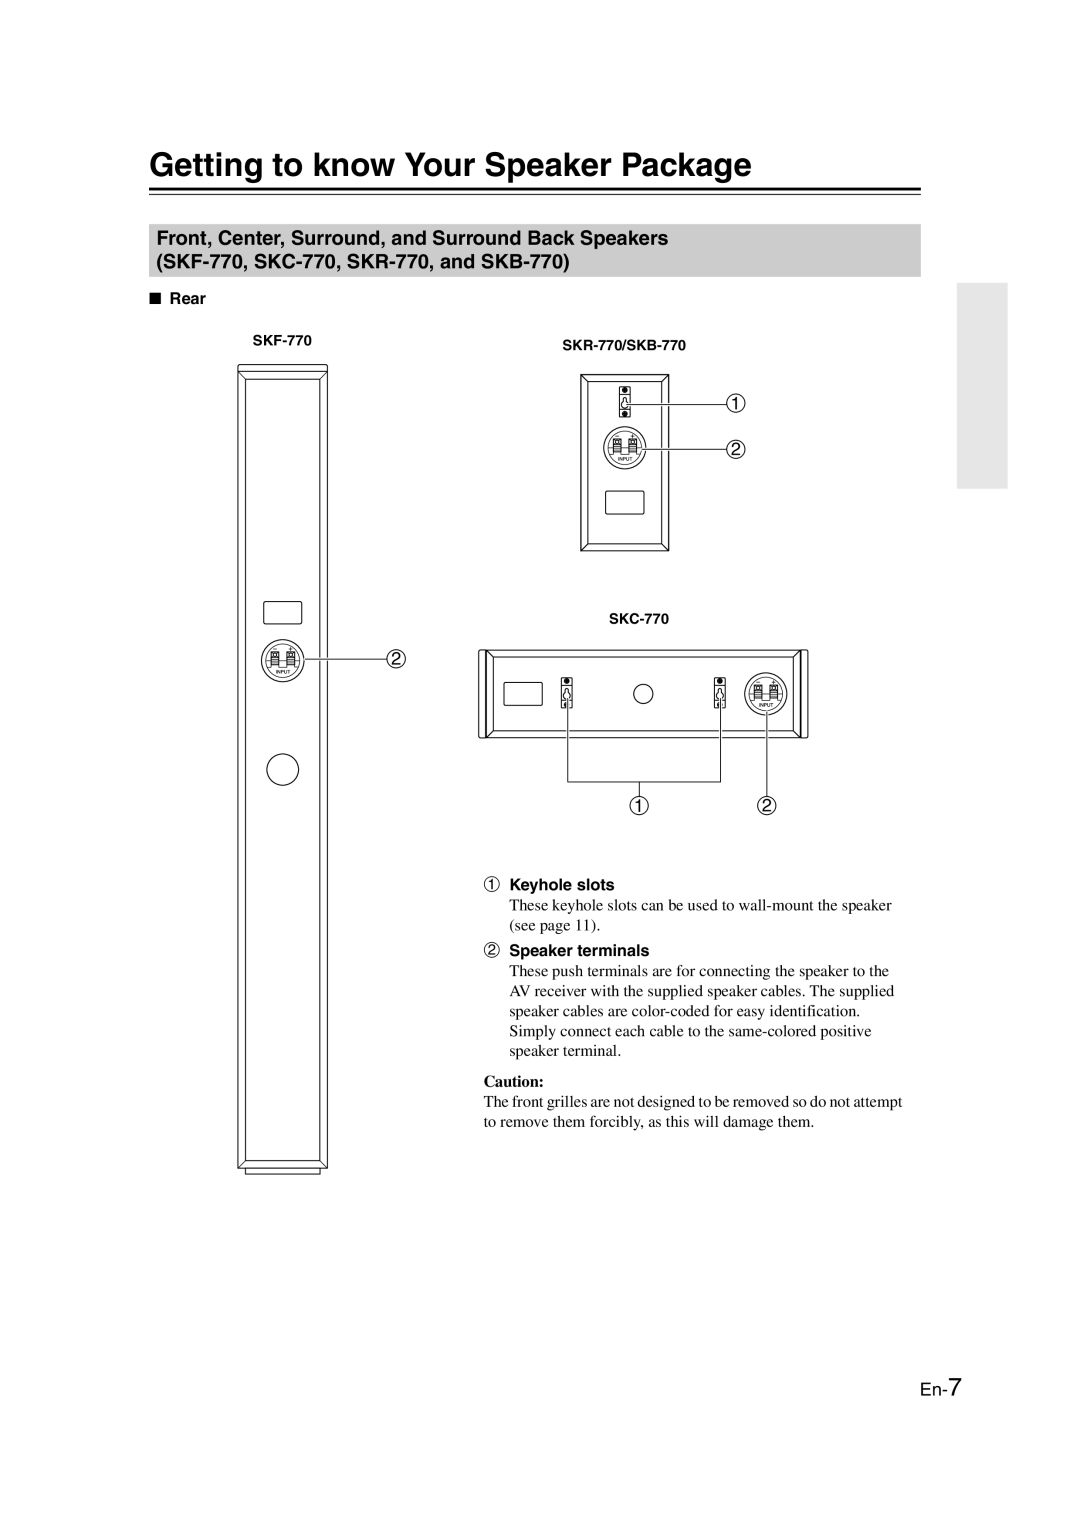 Onkyo HT-RC160 instruction manual Getting to know Your Speaker Package, b a b, En-7 